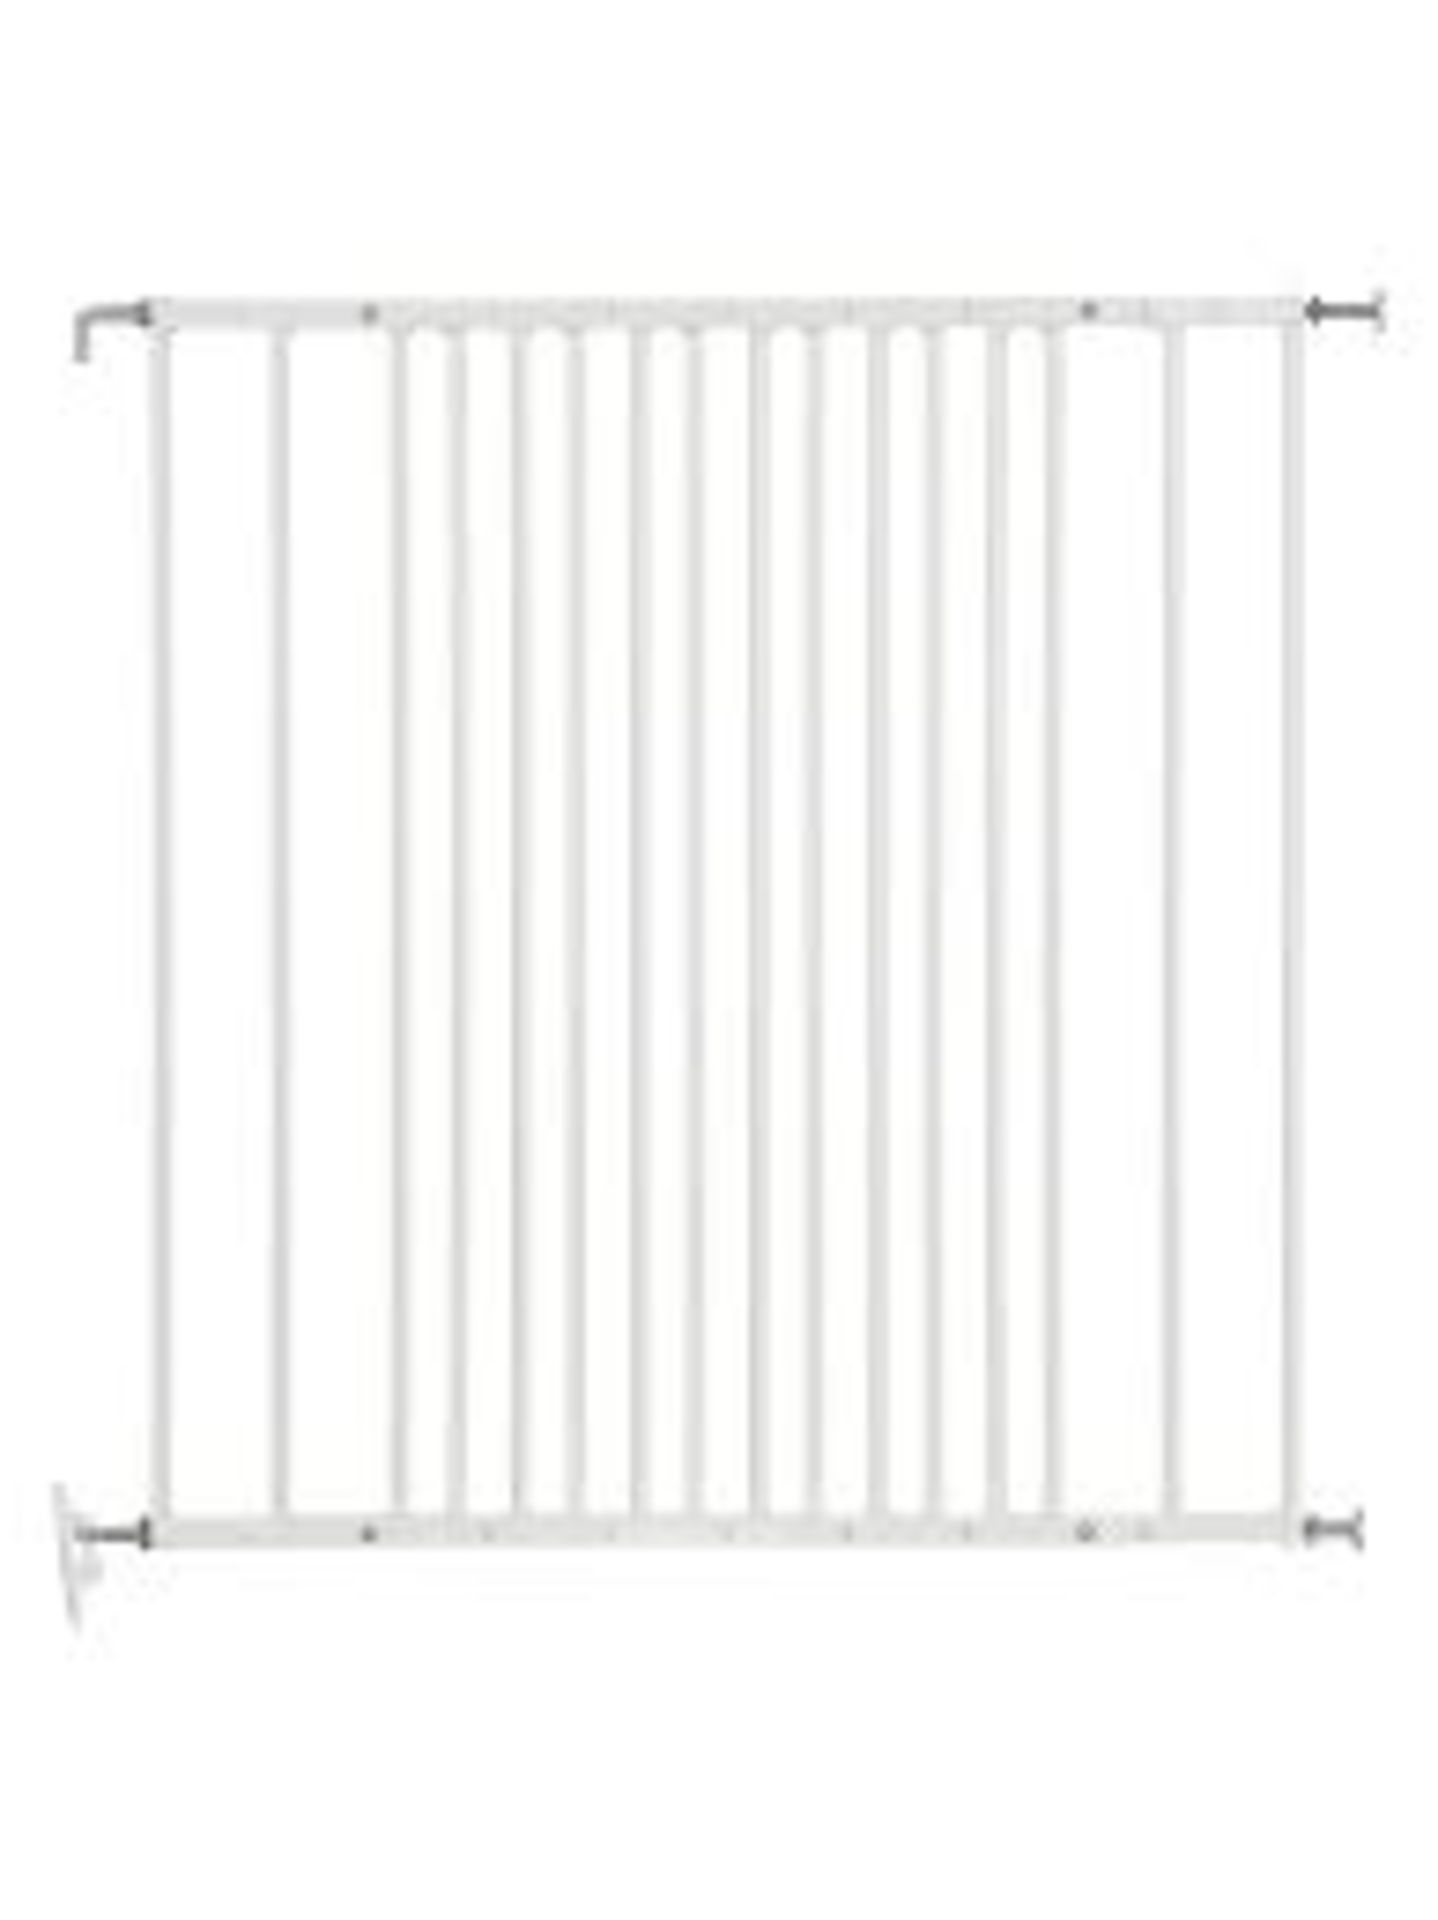 Boxed Metal Baby Dan Extending Safety Gates RRP £25 Each (Pictures Are For Illustration Purposes